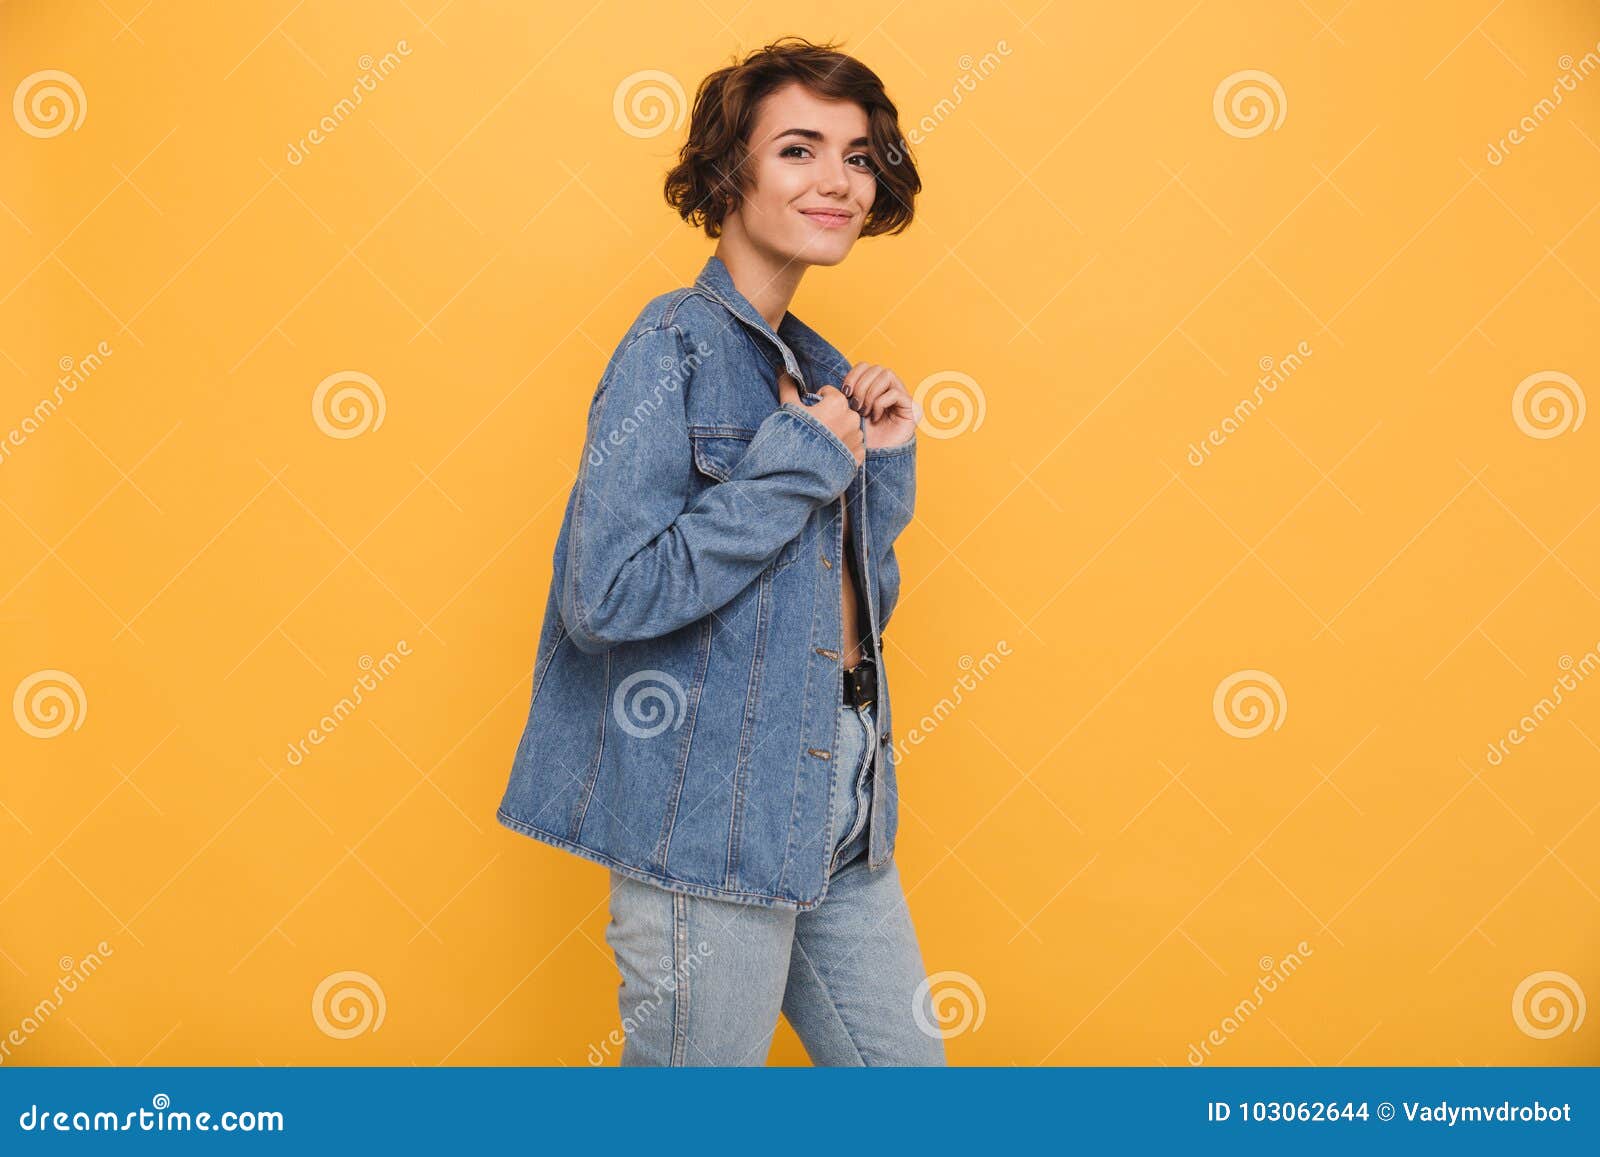 Portrait Of A Young Smiling Woman Dressed In Denim Jacket Stock Photo ...